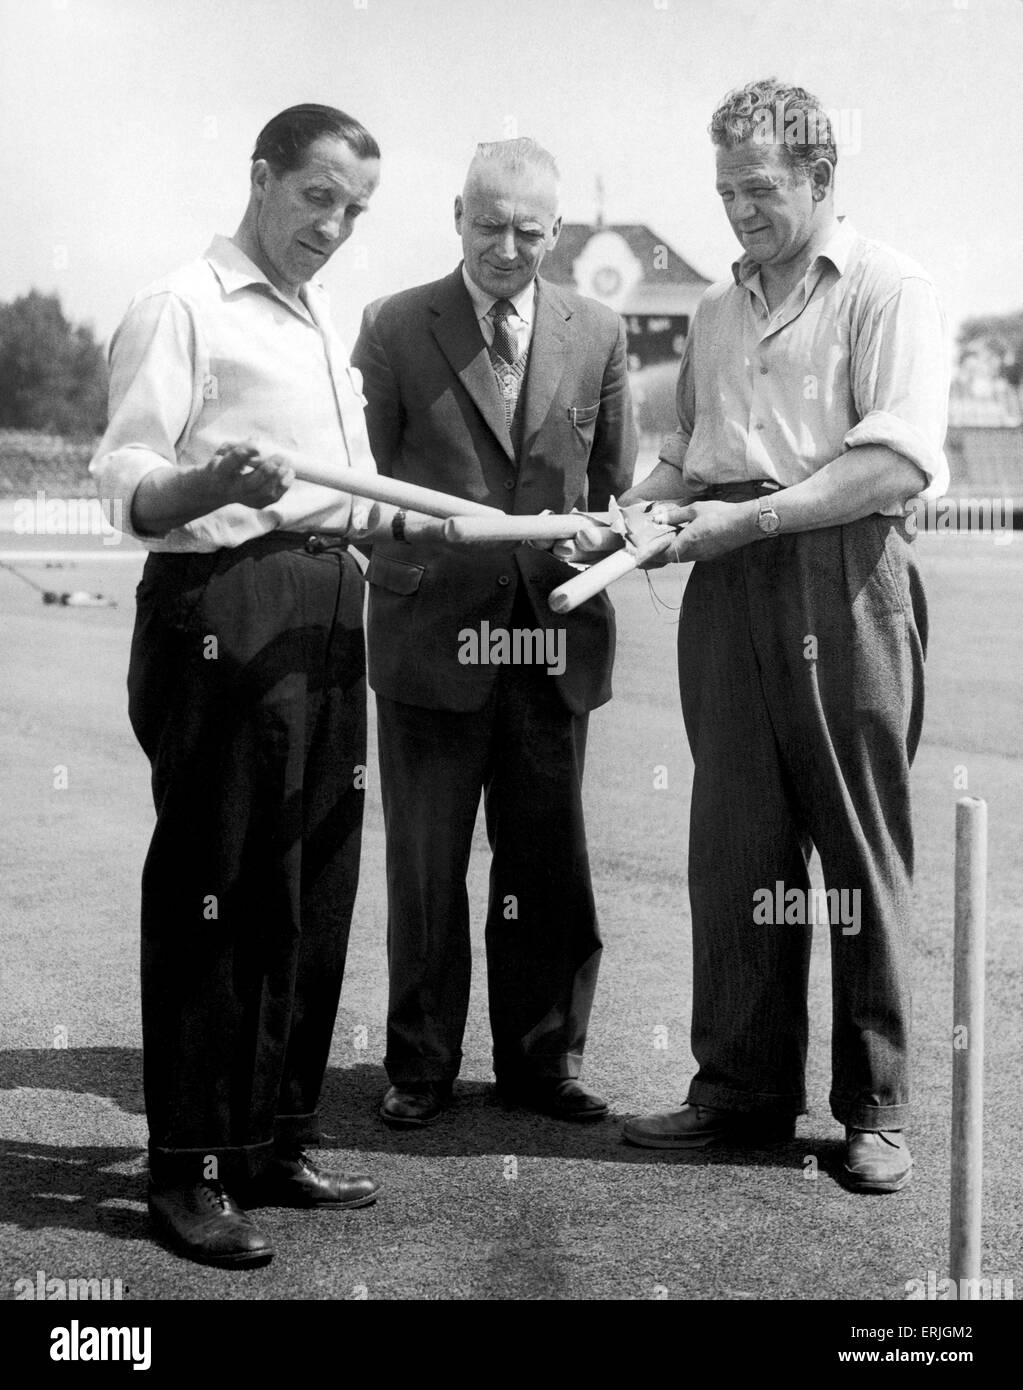 Australian cricket tour of England for the Ashes. England v Australia First Test match at Edgbaston. Ground staff B I Flack, S S harkness and R L Walker choose the stumps for the first test match. 6th June 1961. Stock Photo